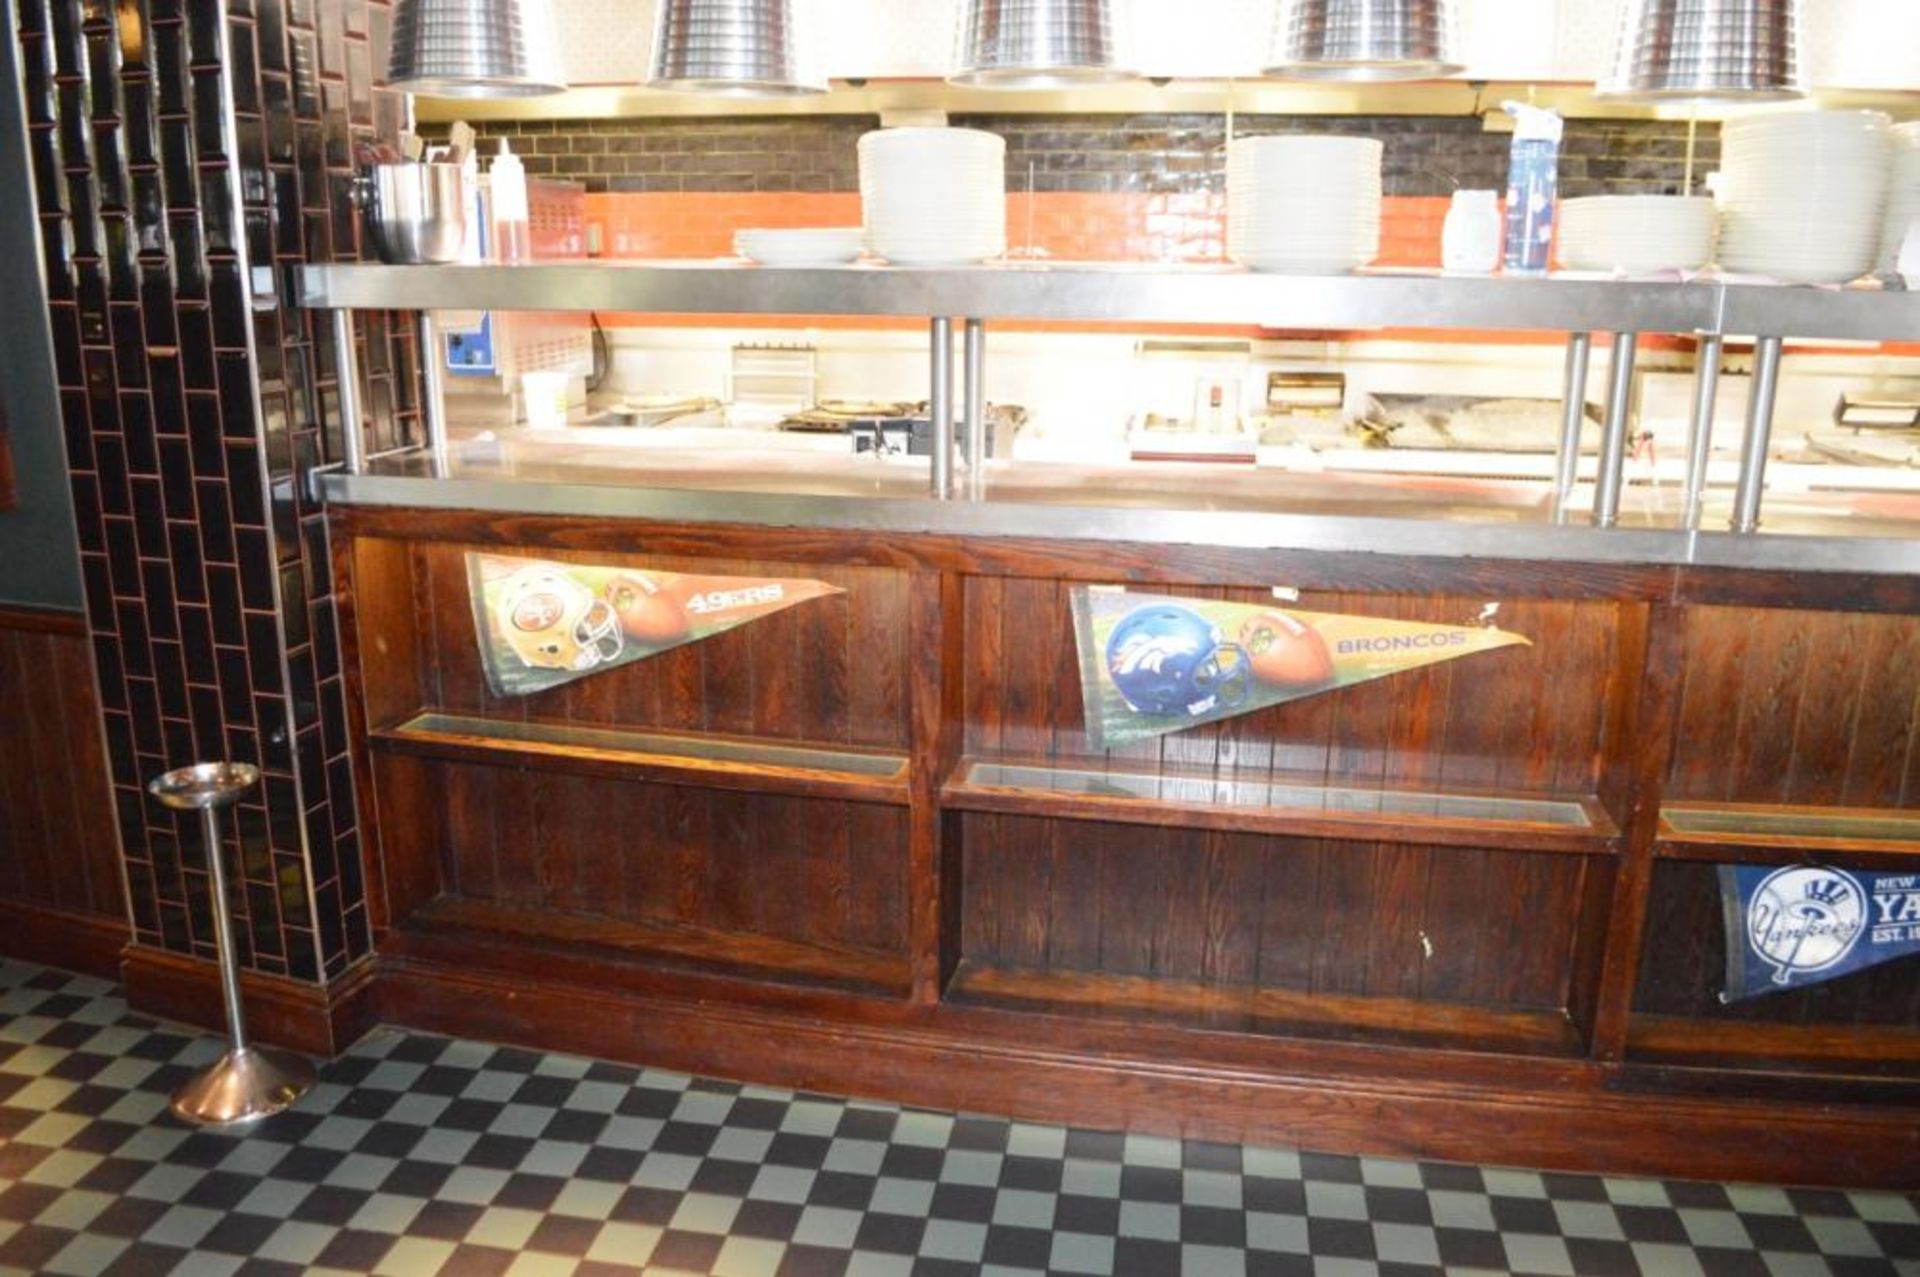 1 x Restaurant Food Collection Gantry Partition With Illuminated Display Shelves and Stainless Steel - Image 9 of 10